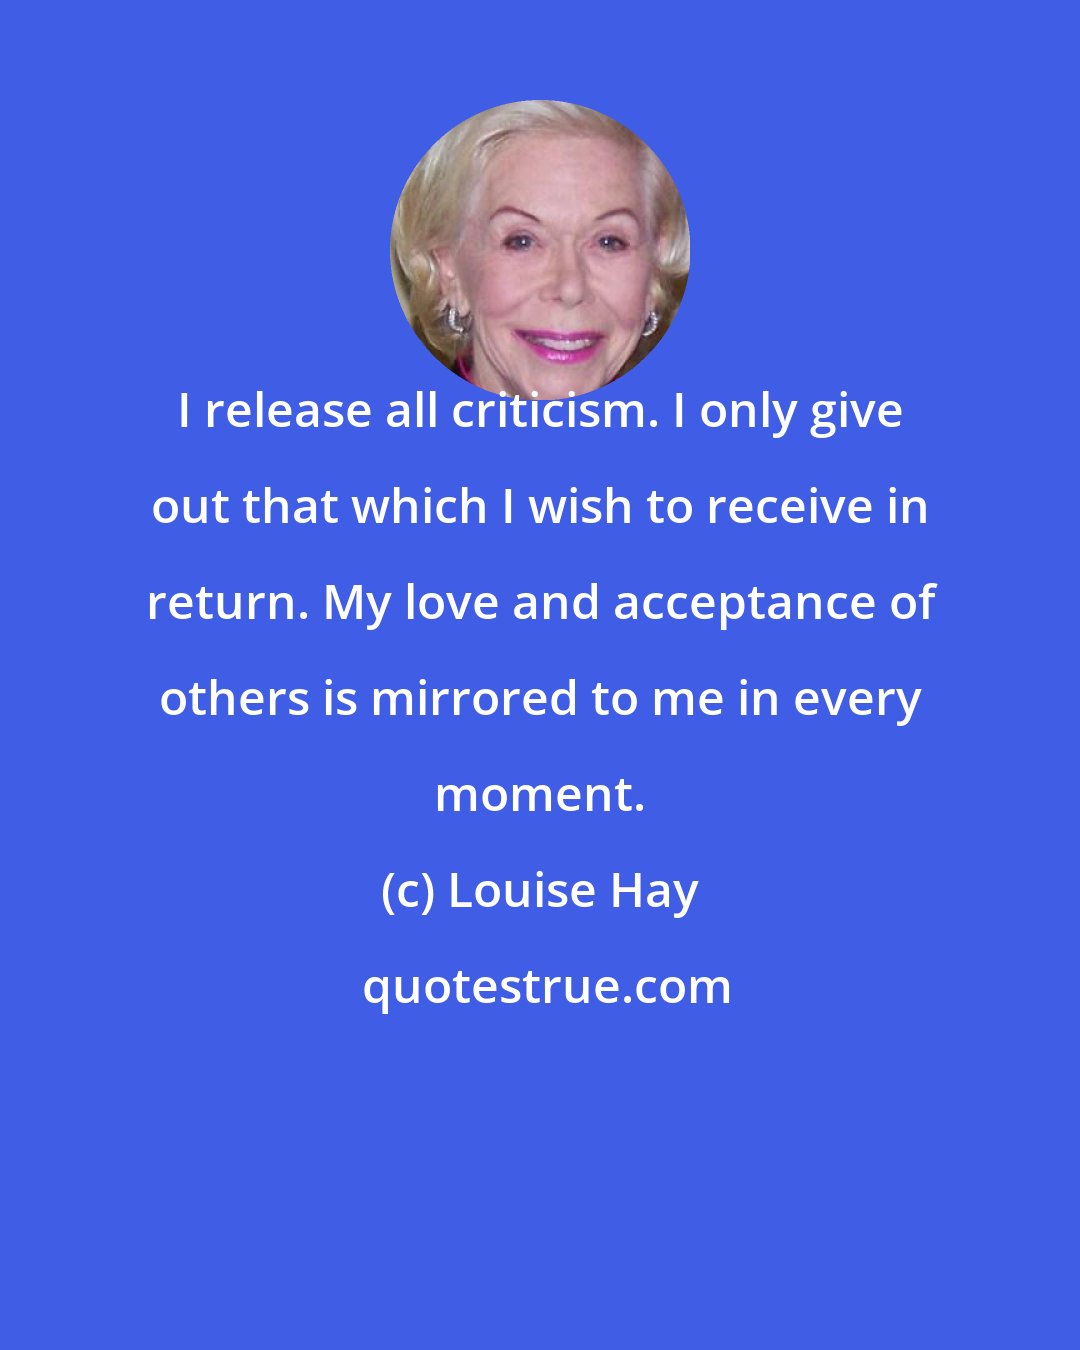 Louise Hay: I release all criticism. I only give out that which I wish to receive in return. My love and acceptance of others is mirrored to me in every moment.